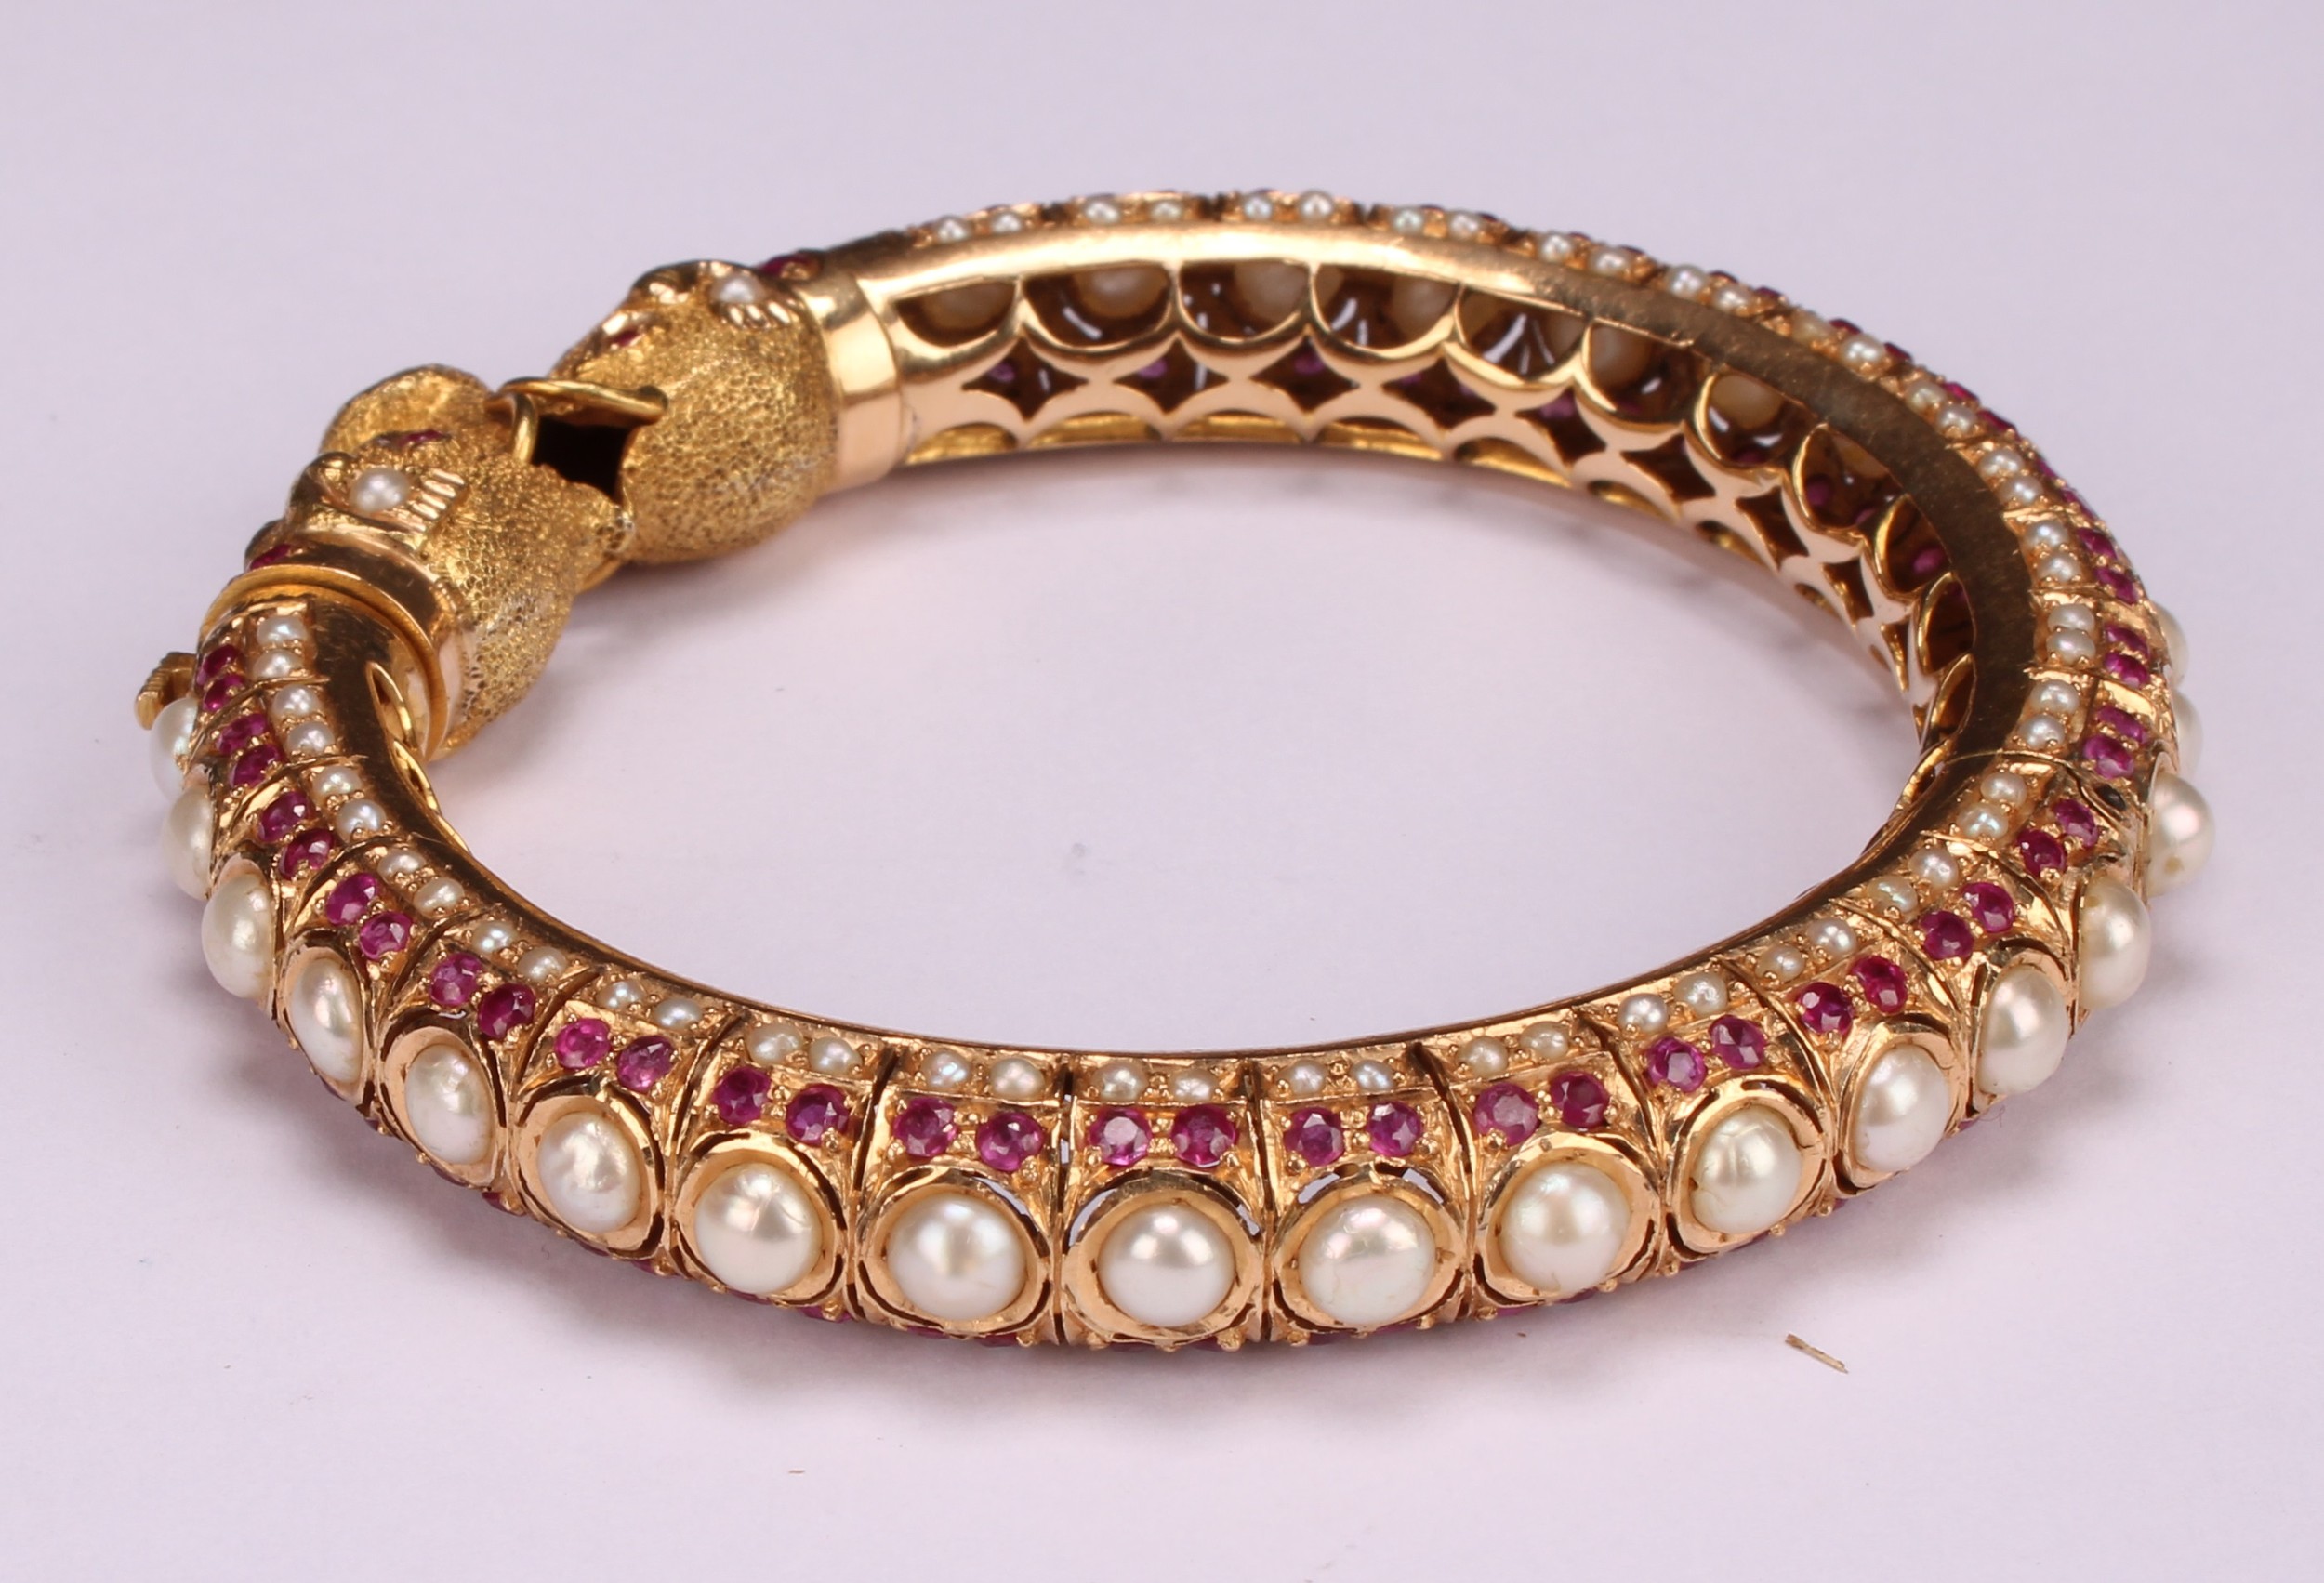 A pair of high carat gold coloured metal Indian wedding bangles, the whole inlaid with pearls - Image 9 of 11